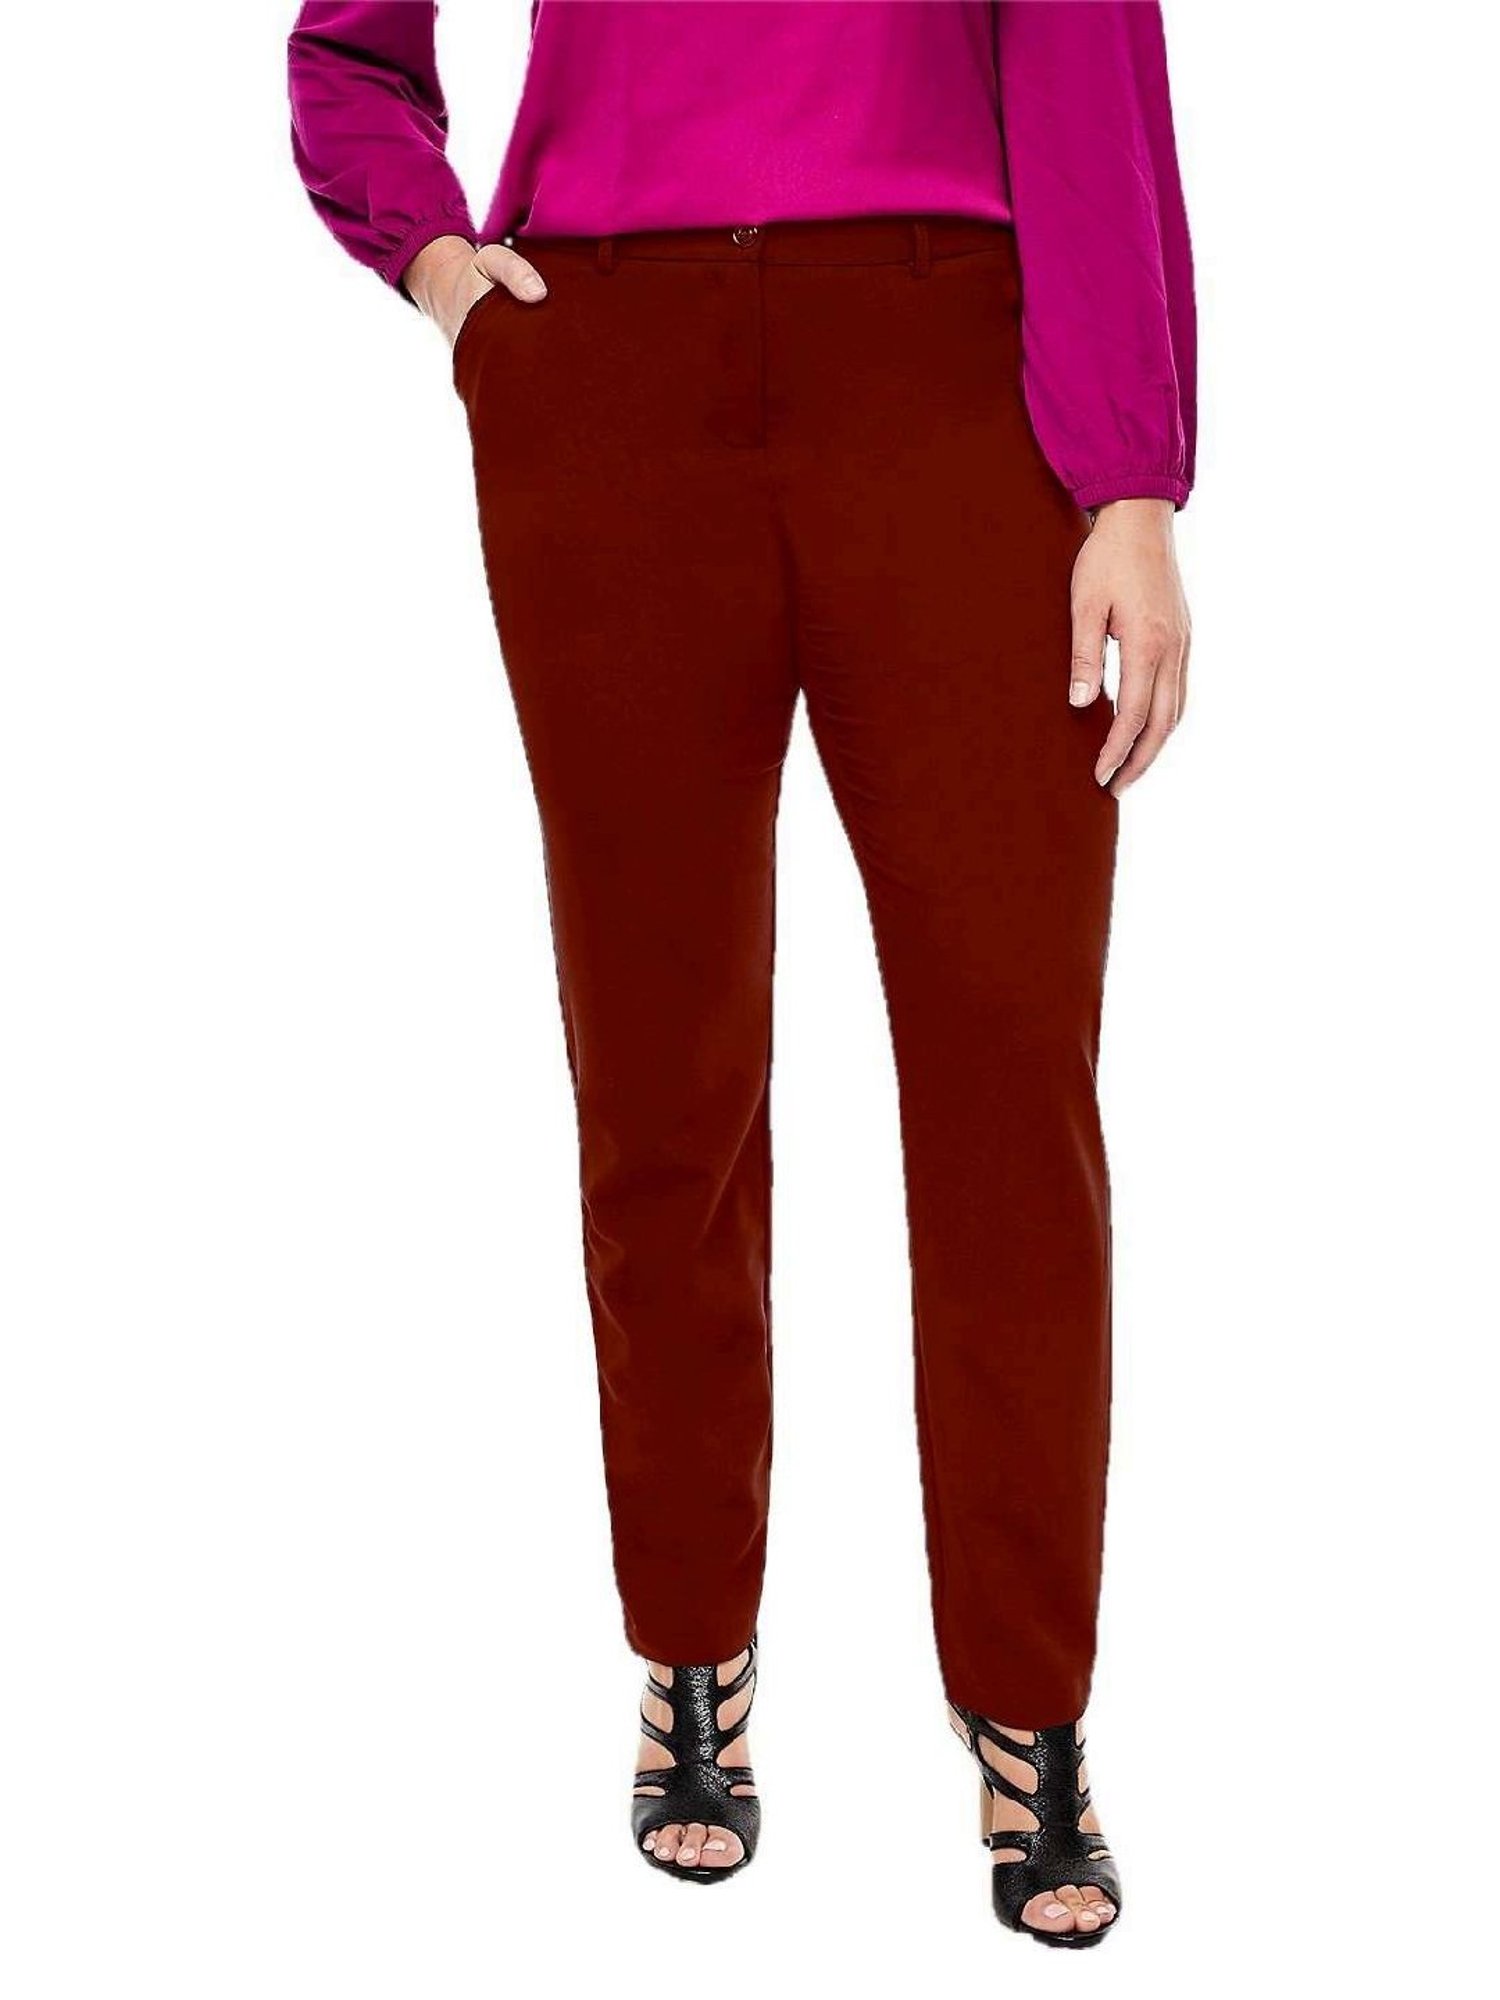 Carrot Trousers  Buy Carrot Trousers online in India